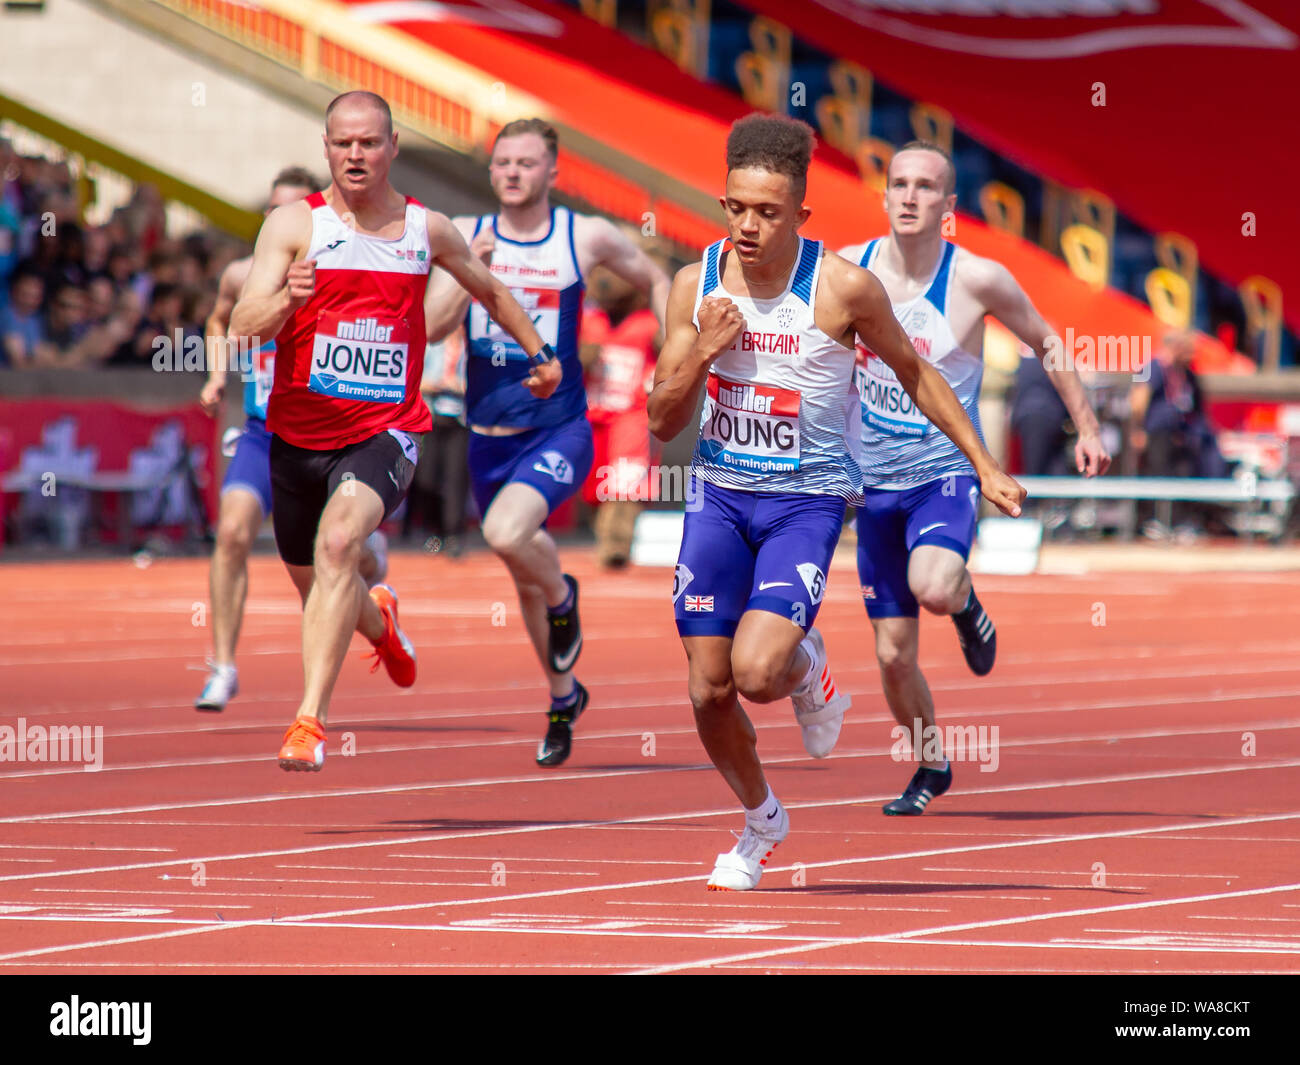 Competitors in action in the men's T35 / 38 100 metres, including Great Britain's Rhys Jones and Thomas Young, during the Birmingham 2019 Müller Grand Prix, at the Alexander Stadium, Birmingham. Stock Photo